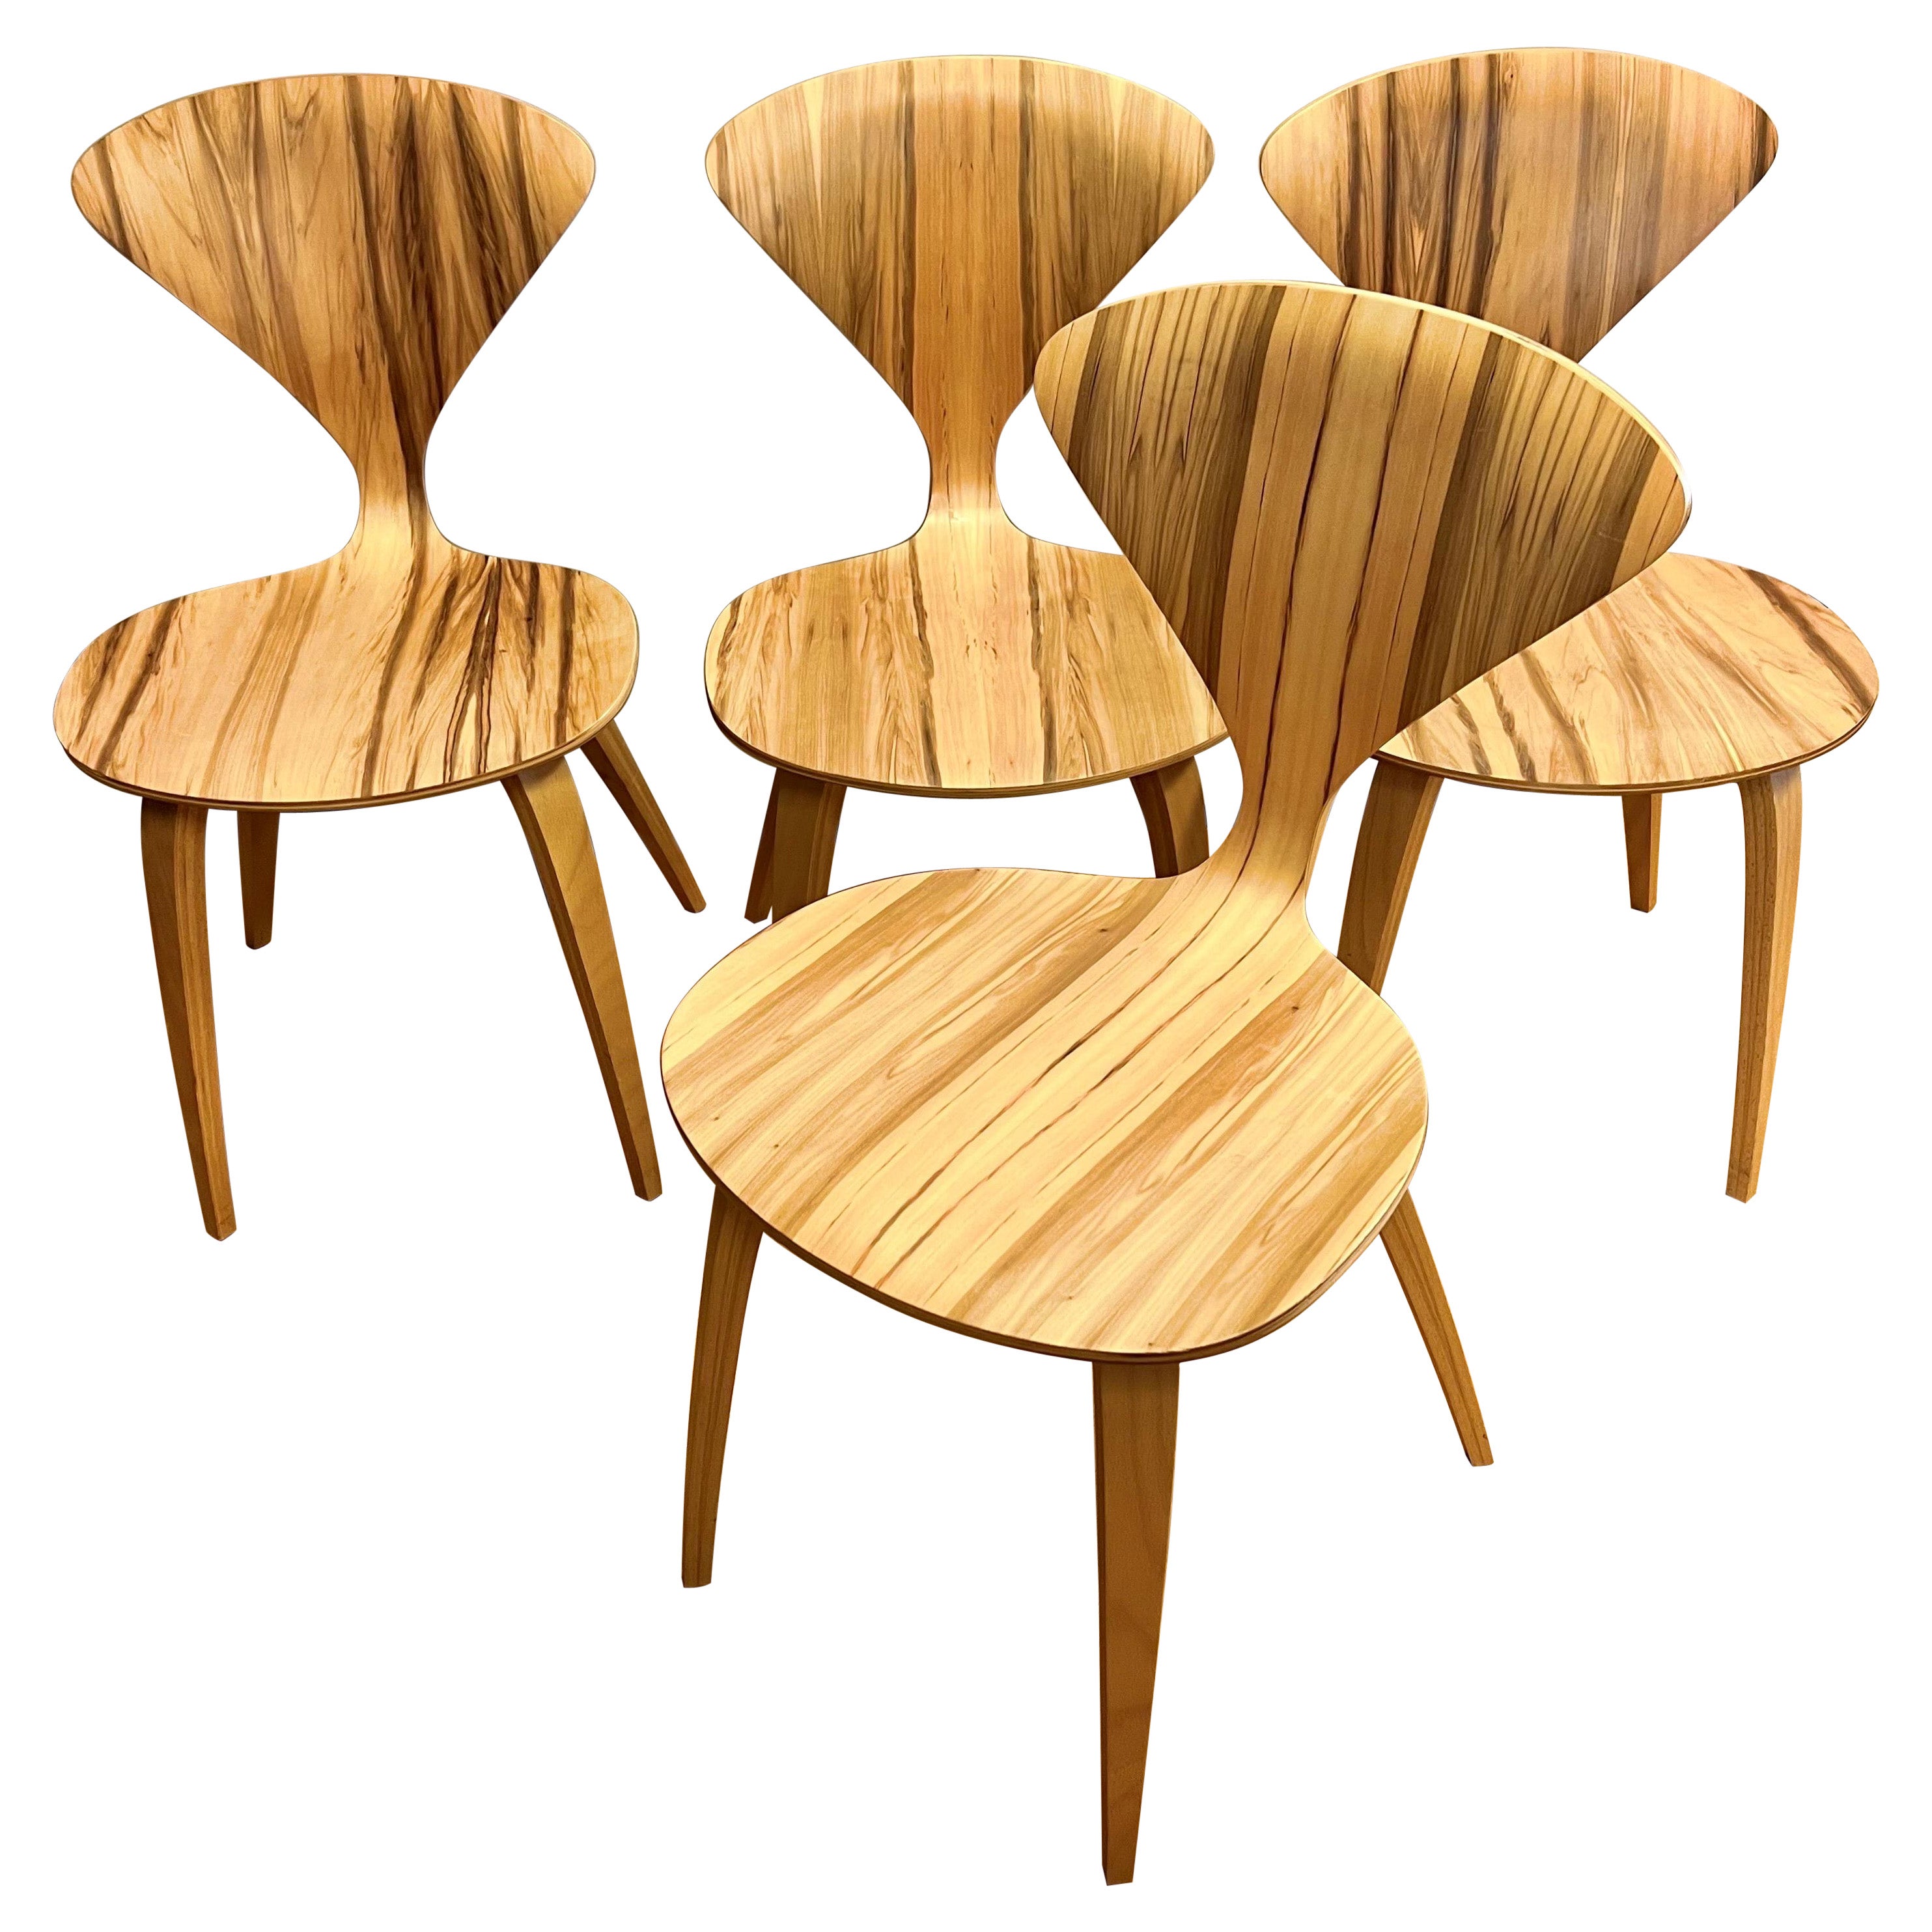 Cherner Chair Company Molded Wood Dining Chairs, Set of 4